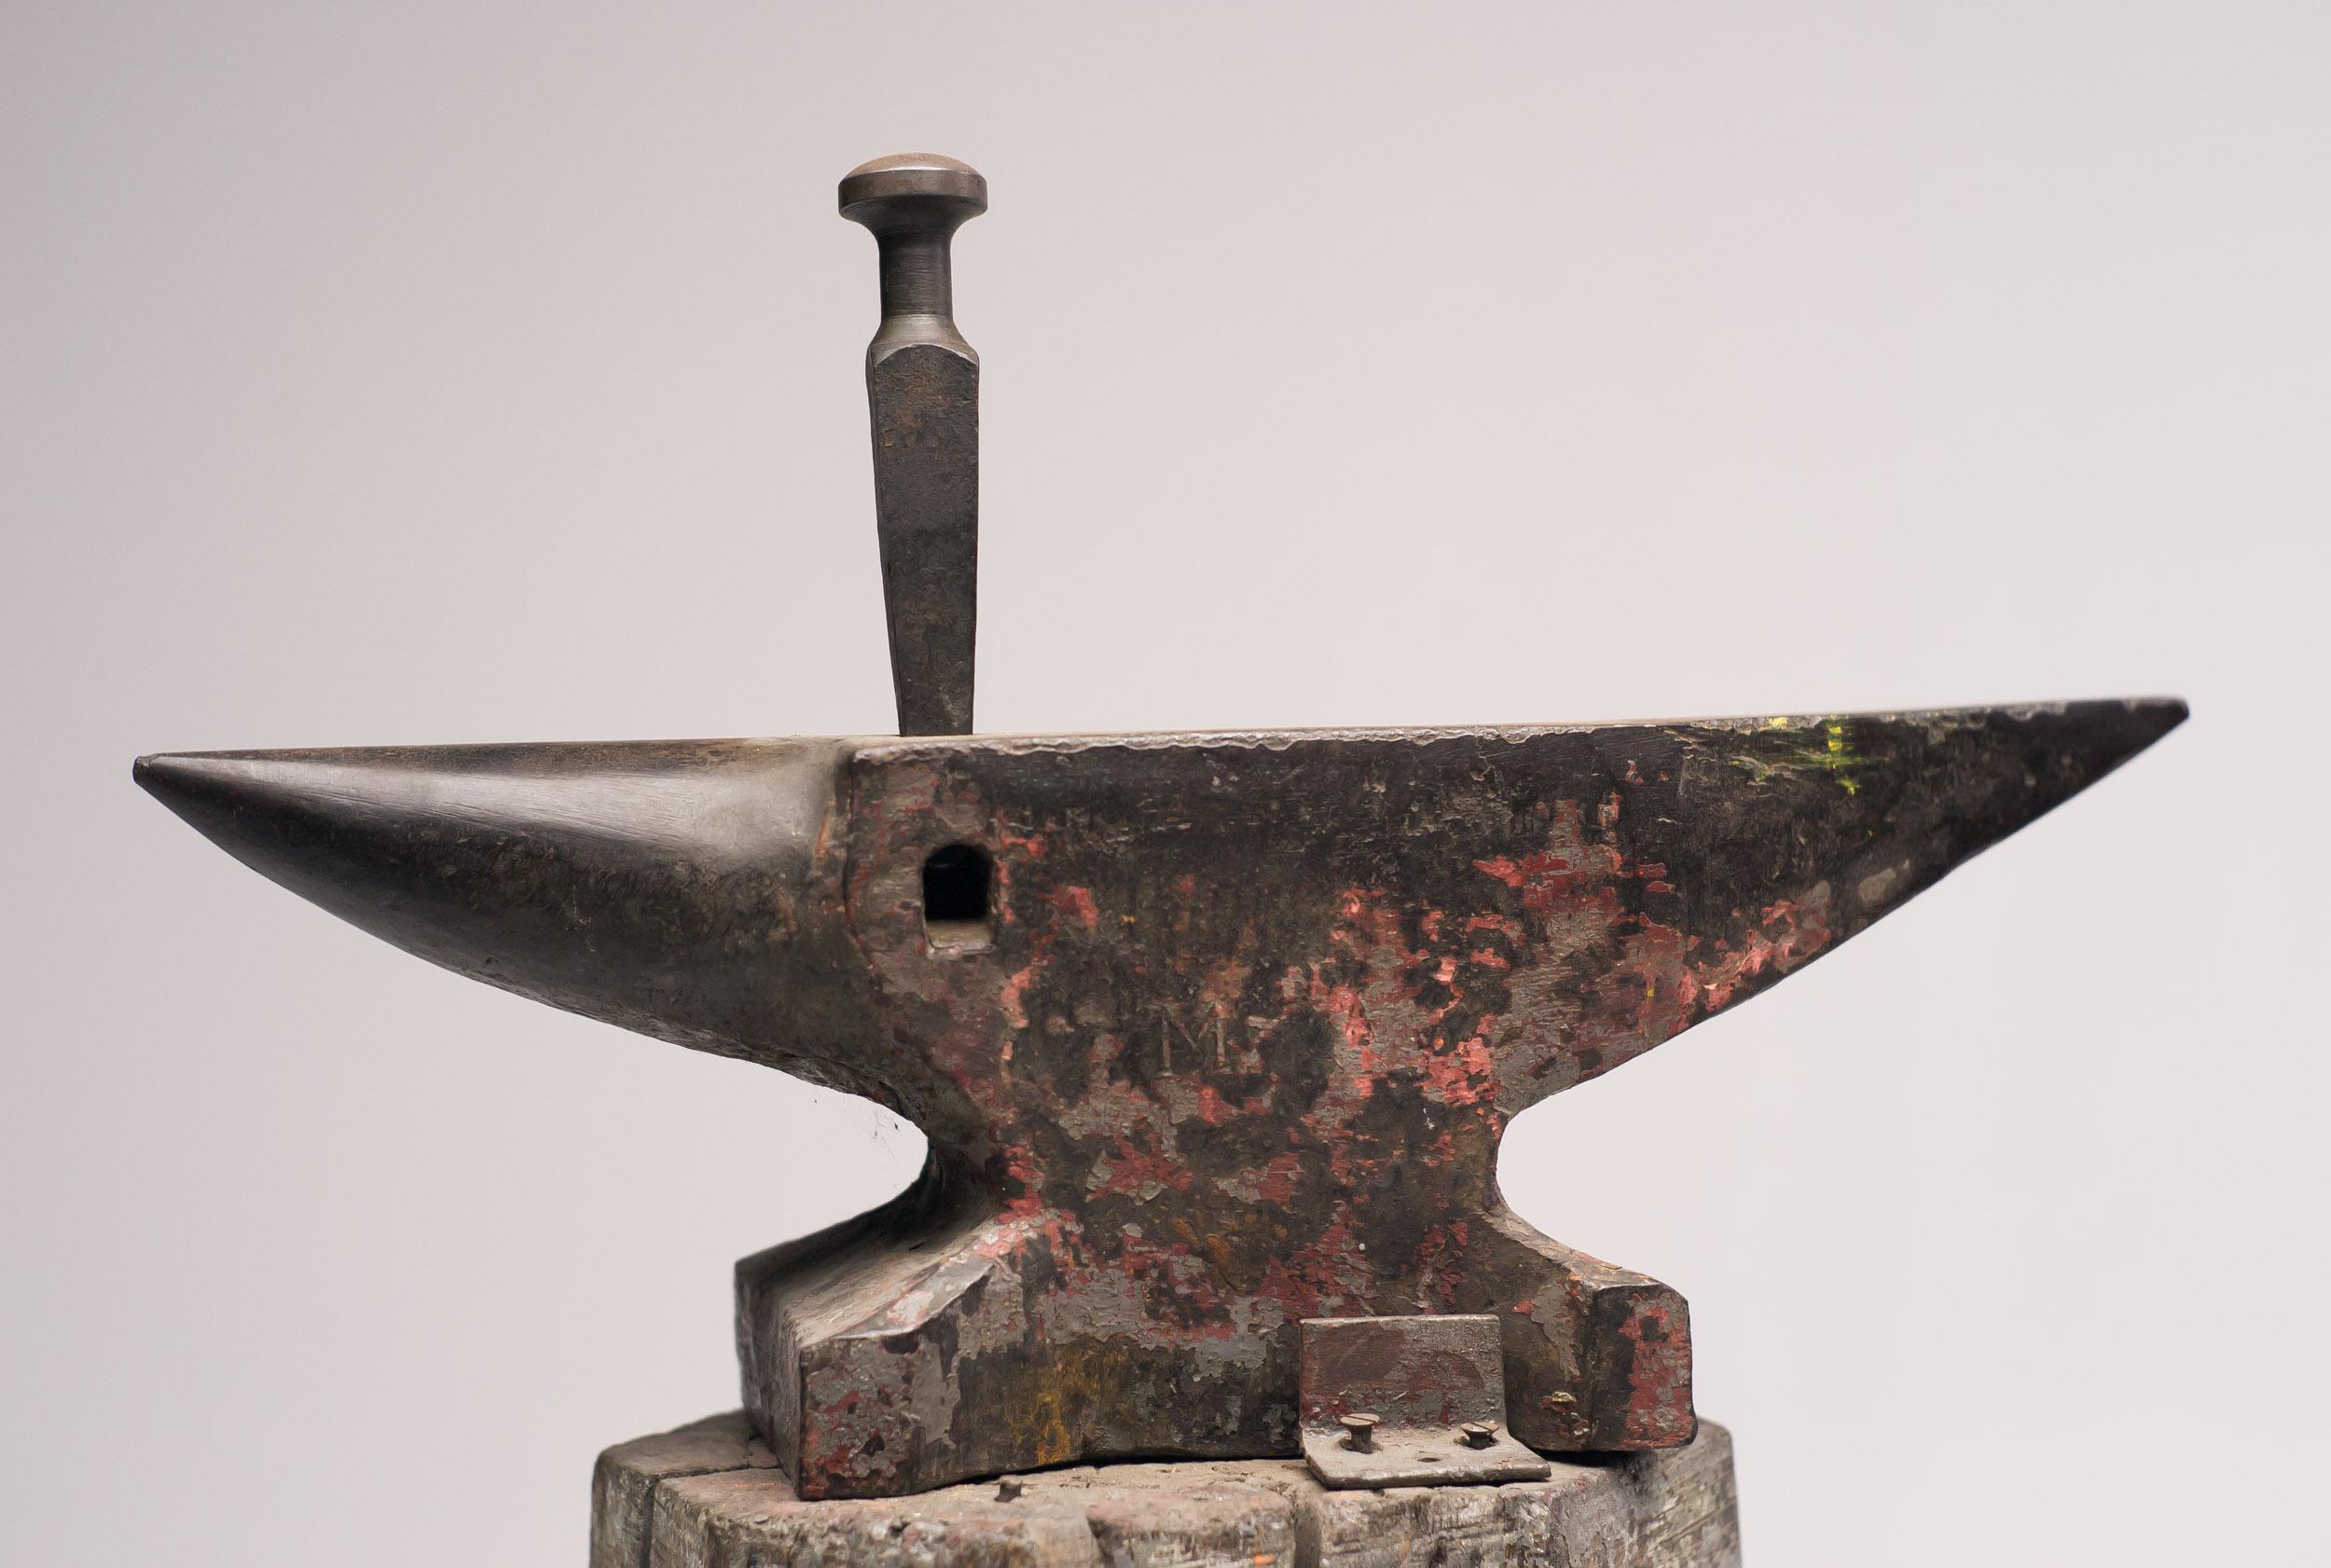 Vintage Dutch 19th century forged iron anvil on a wooden base with a beautiful patina.